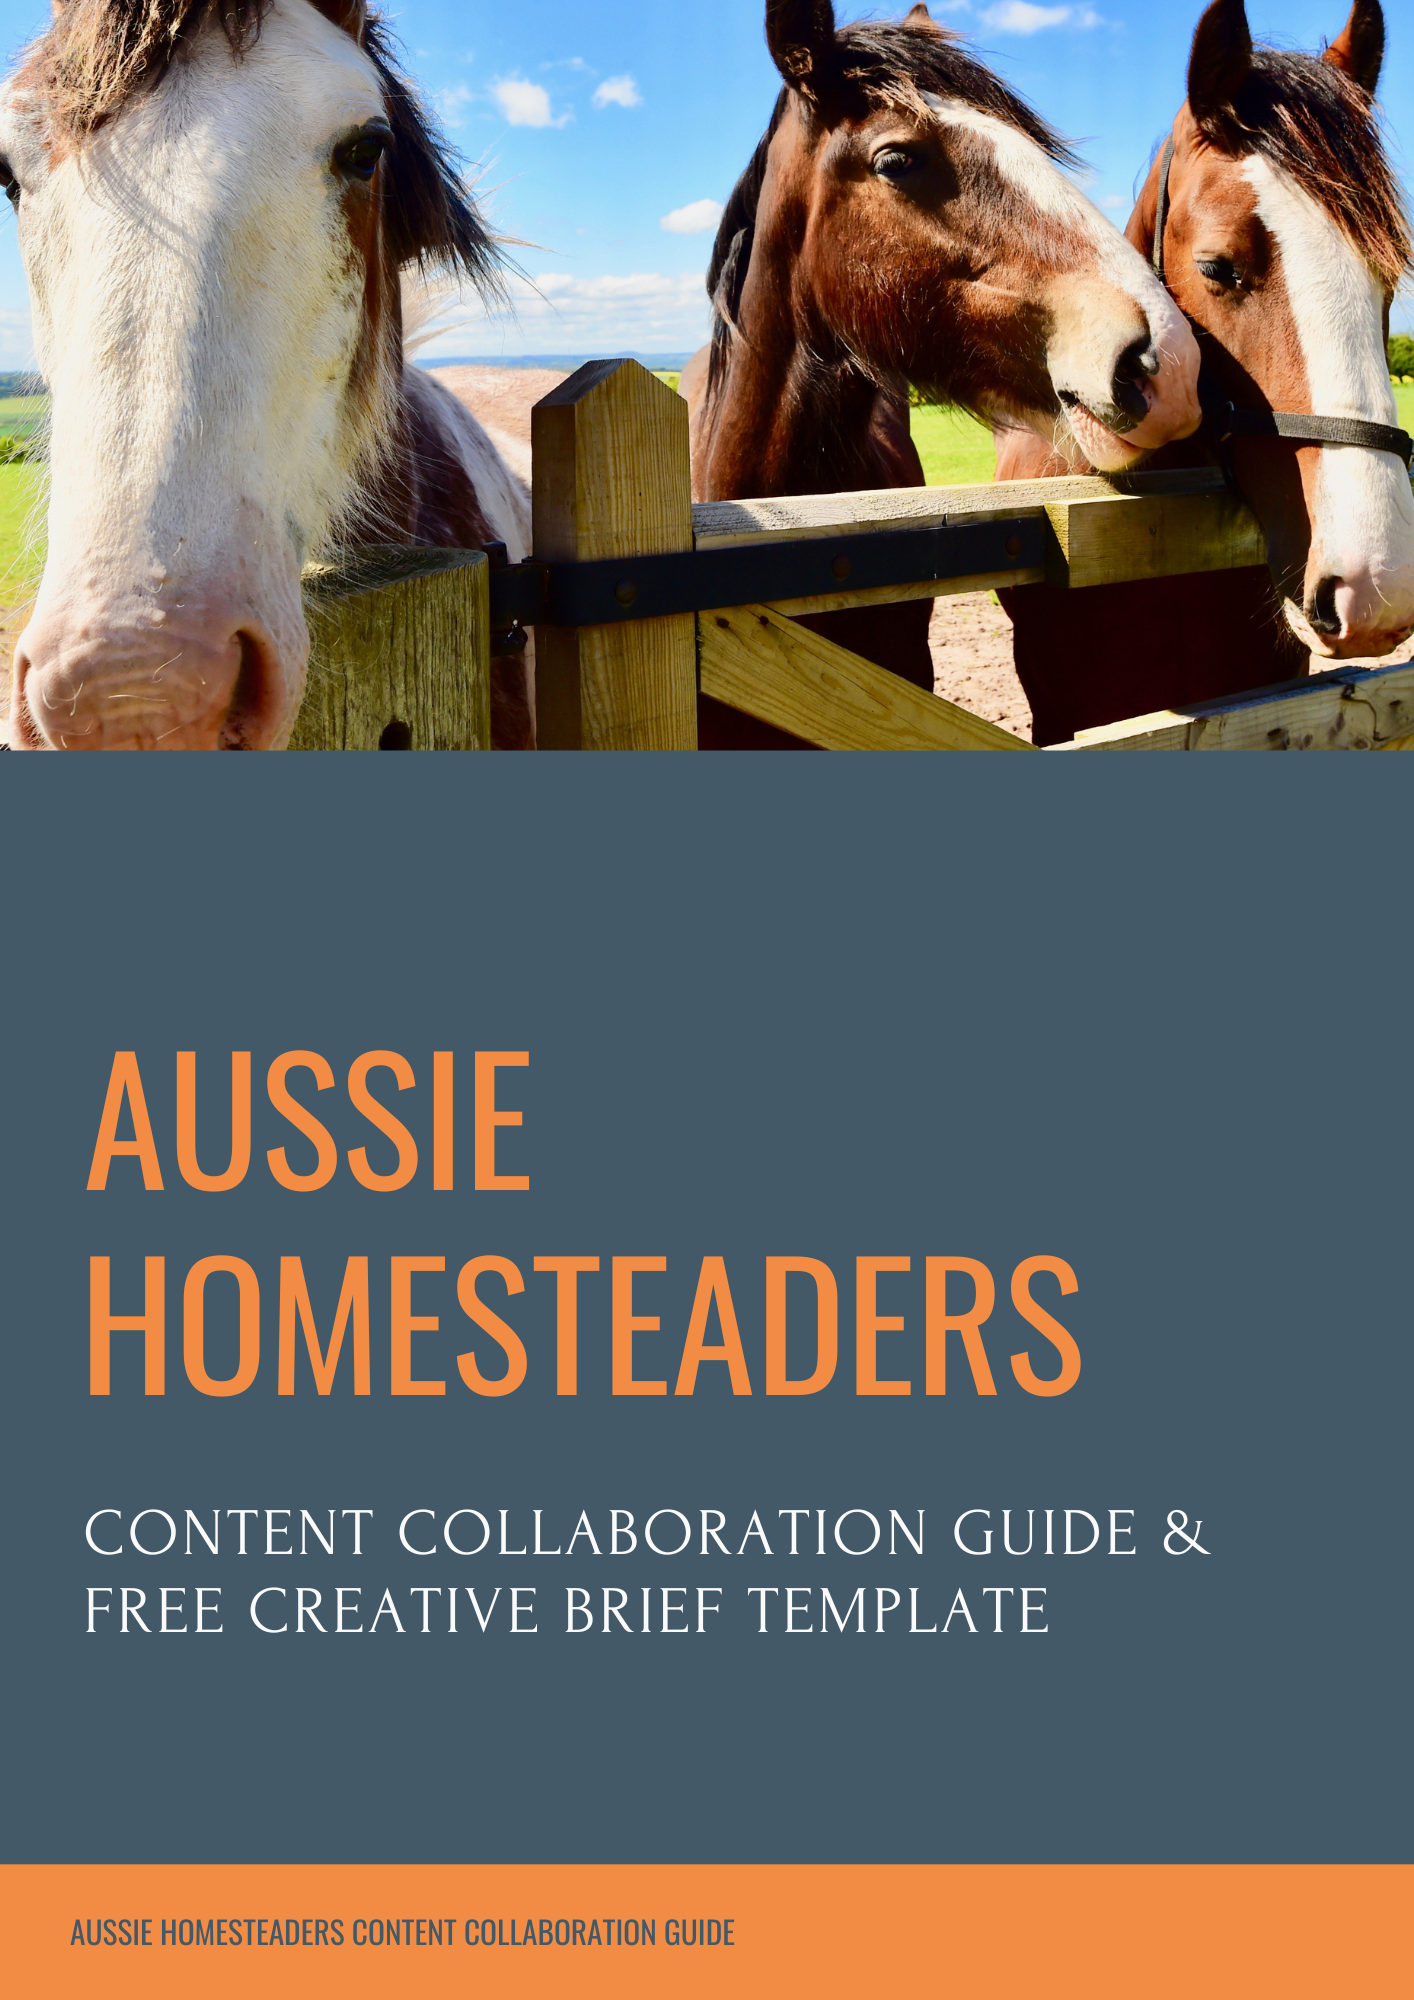 Aussie Homesteaders Content Collaboration Guide & FREE Creative Brief Template Download